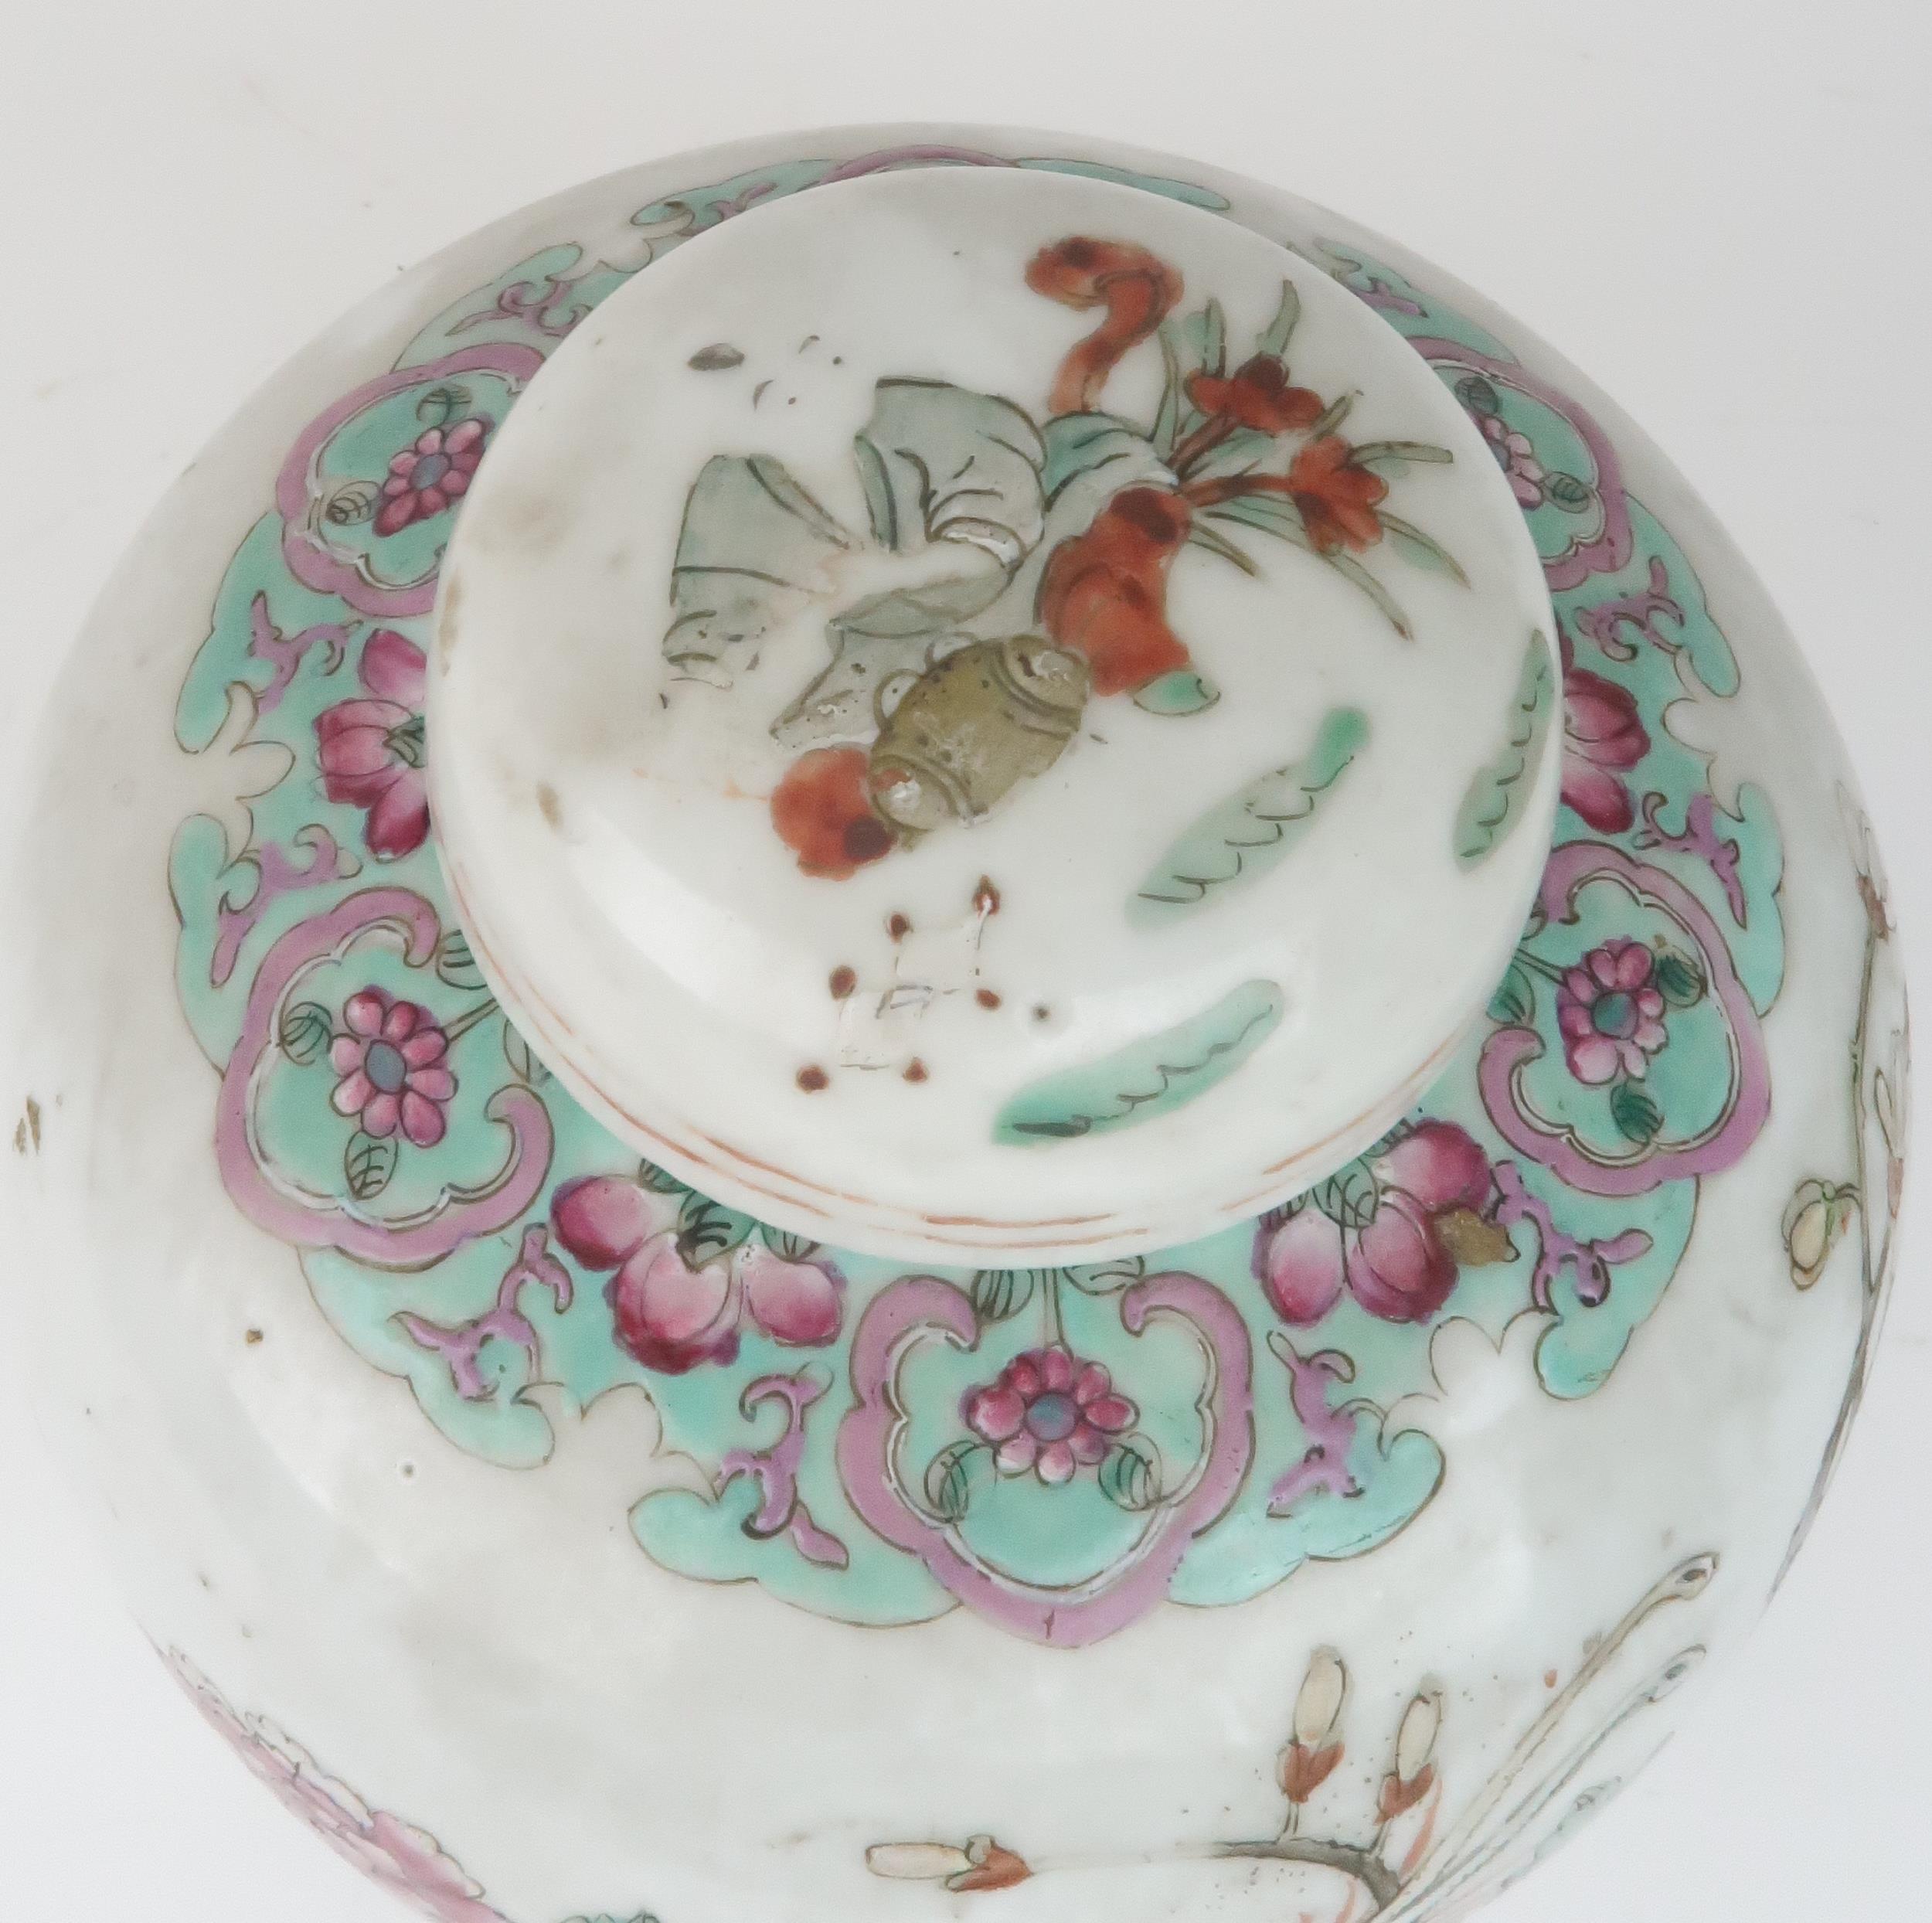 A CHINESE FAMILLE ROSE GINGER JAR AND COVER  painted with birds amongst foliage within formal bands, - Image 4 of 6